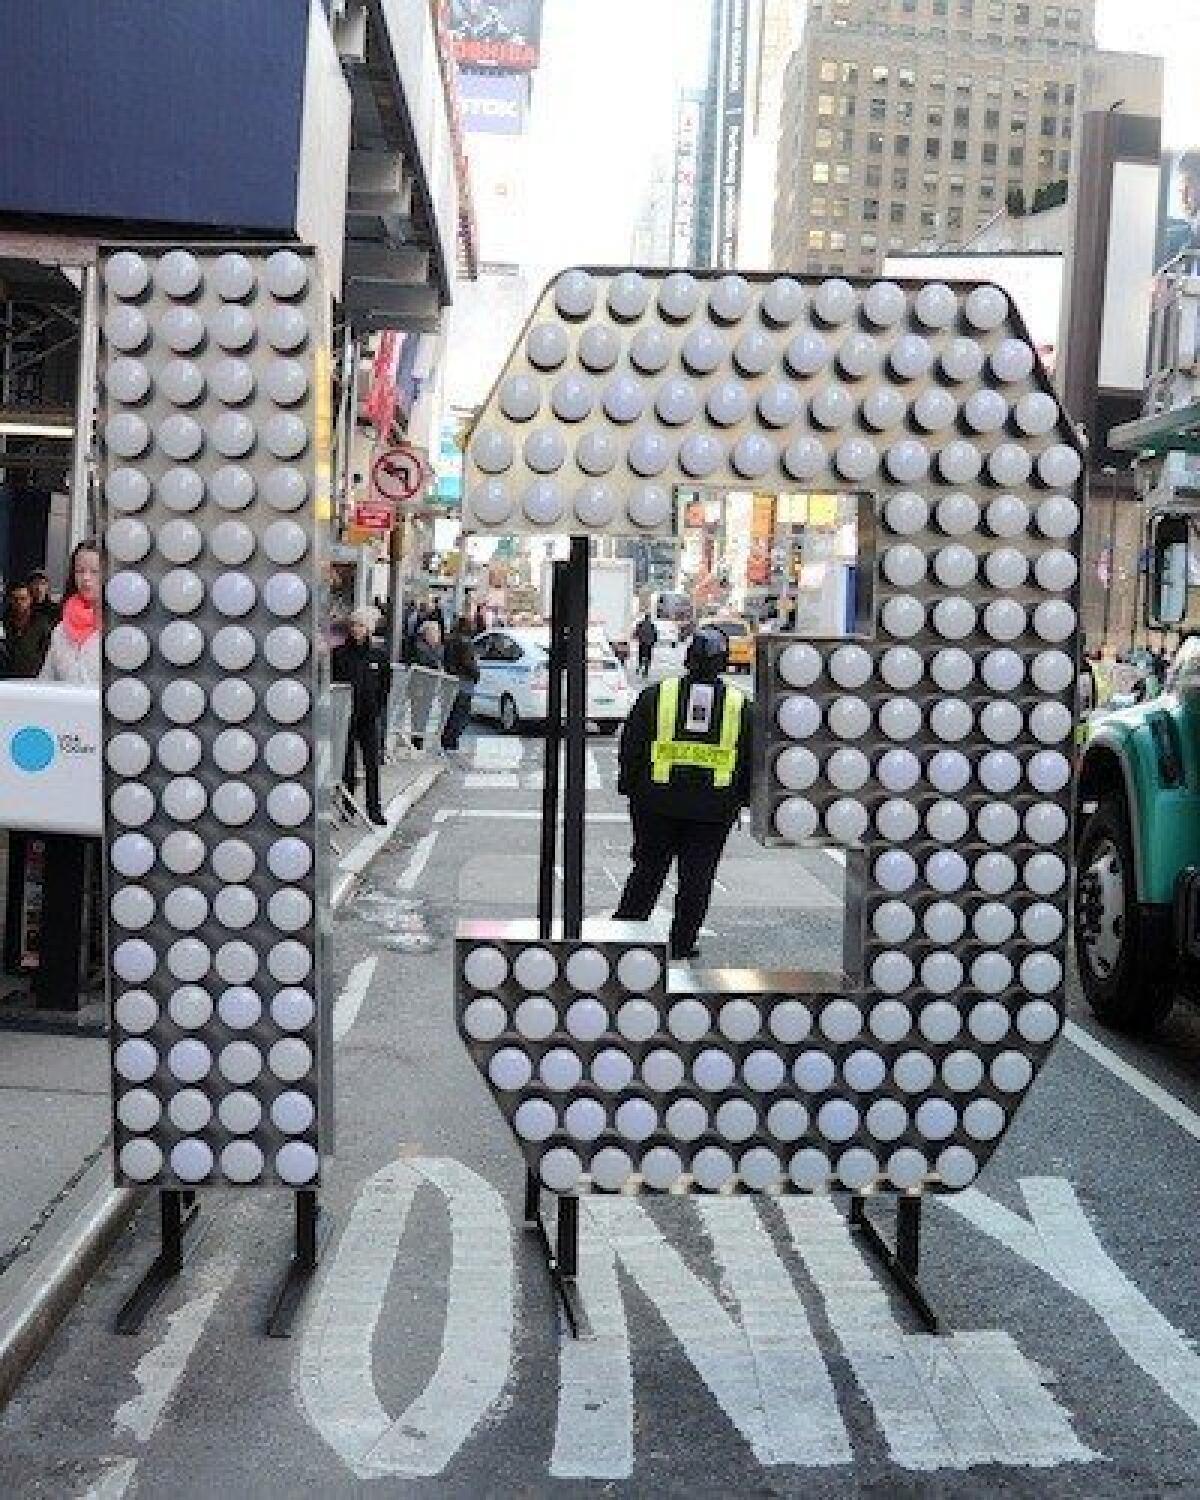 The lighted number 13 for "2013" arrived at Times Square last week.